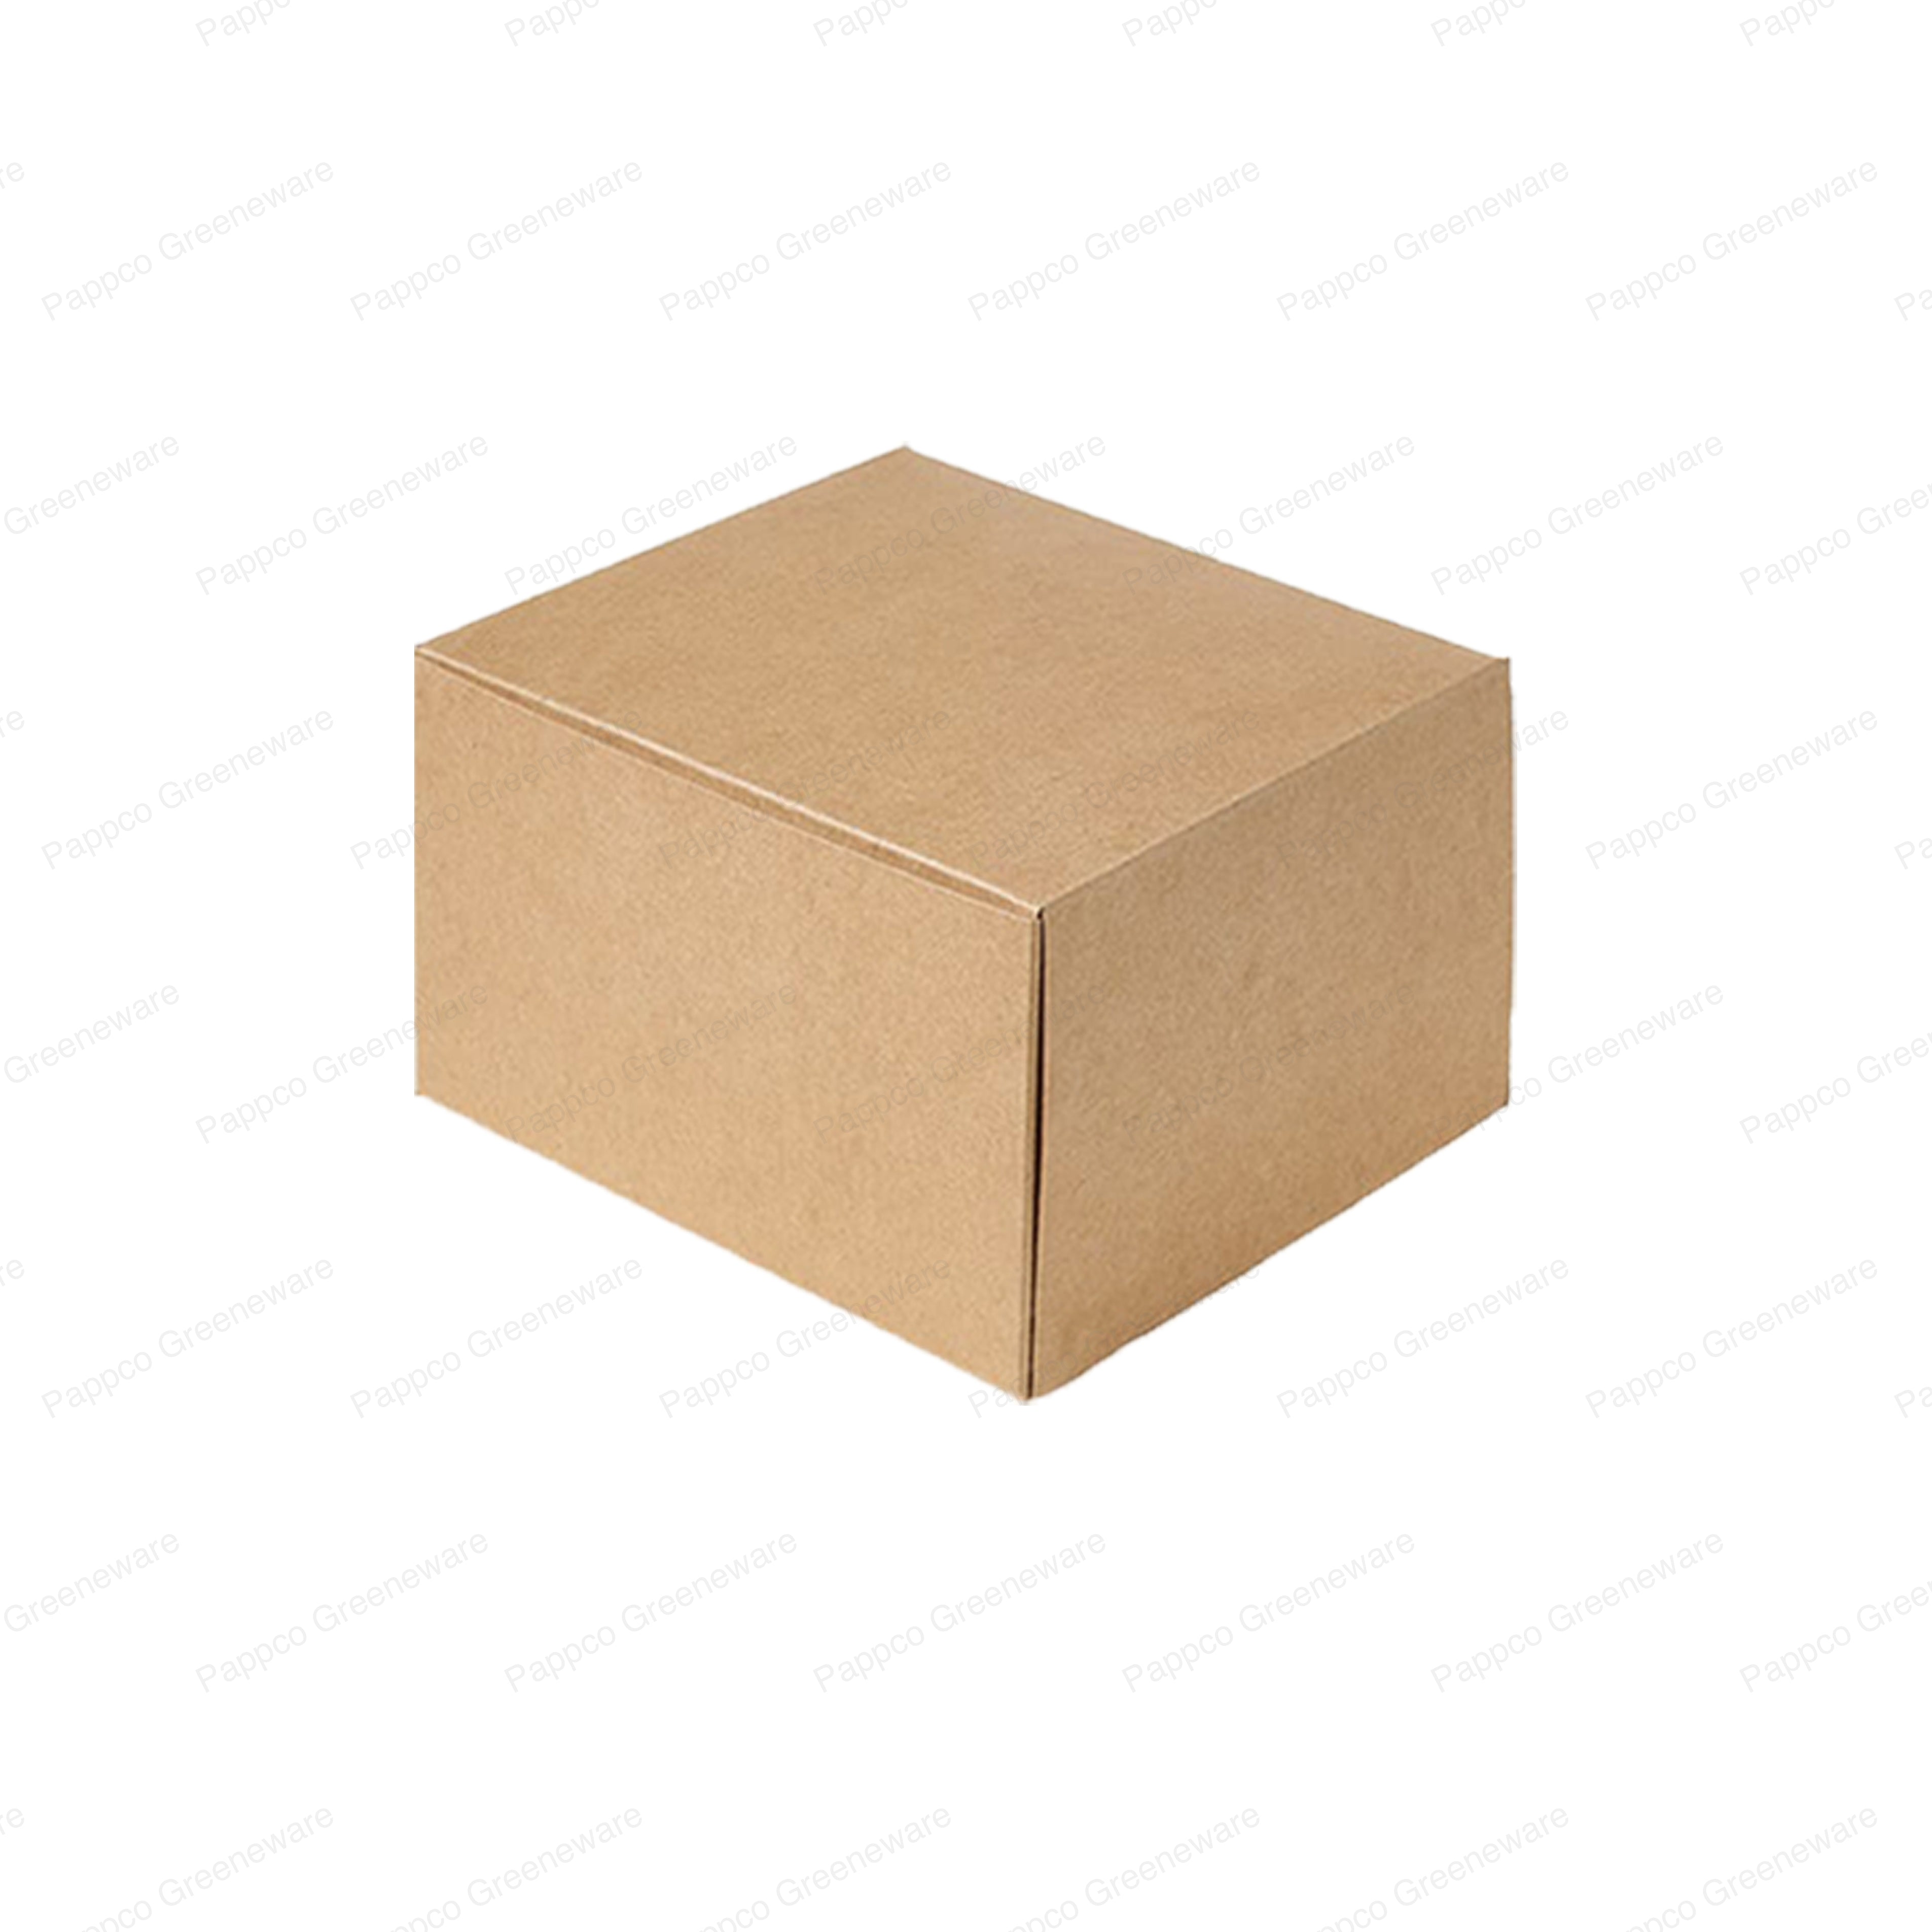 Buy Cake Boxes 2 kg Cake Boxes 12 kg Cake Shop Cakes Boxes  Nice  Packaging